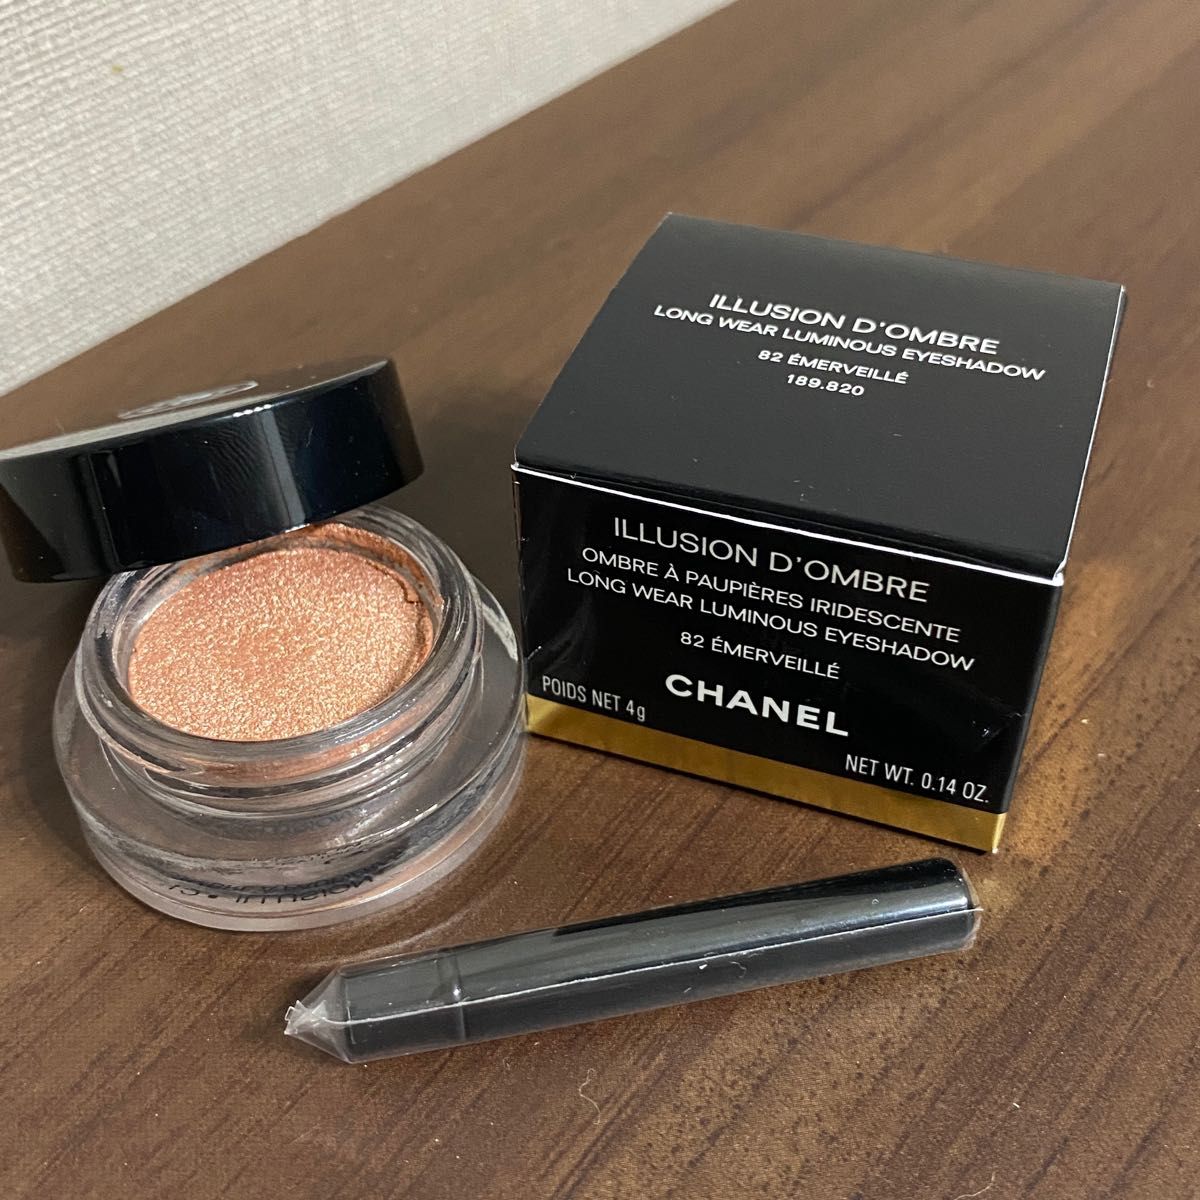 Chanel Vision Illusion d'Ombre Long Wear Luminous Eyeshadow Review